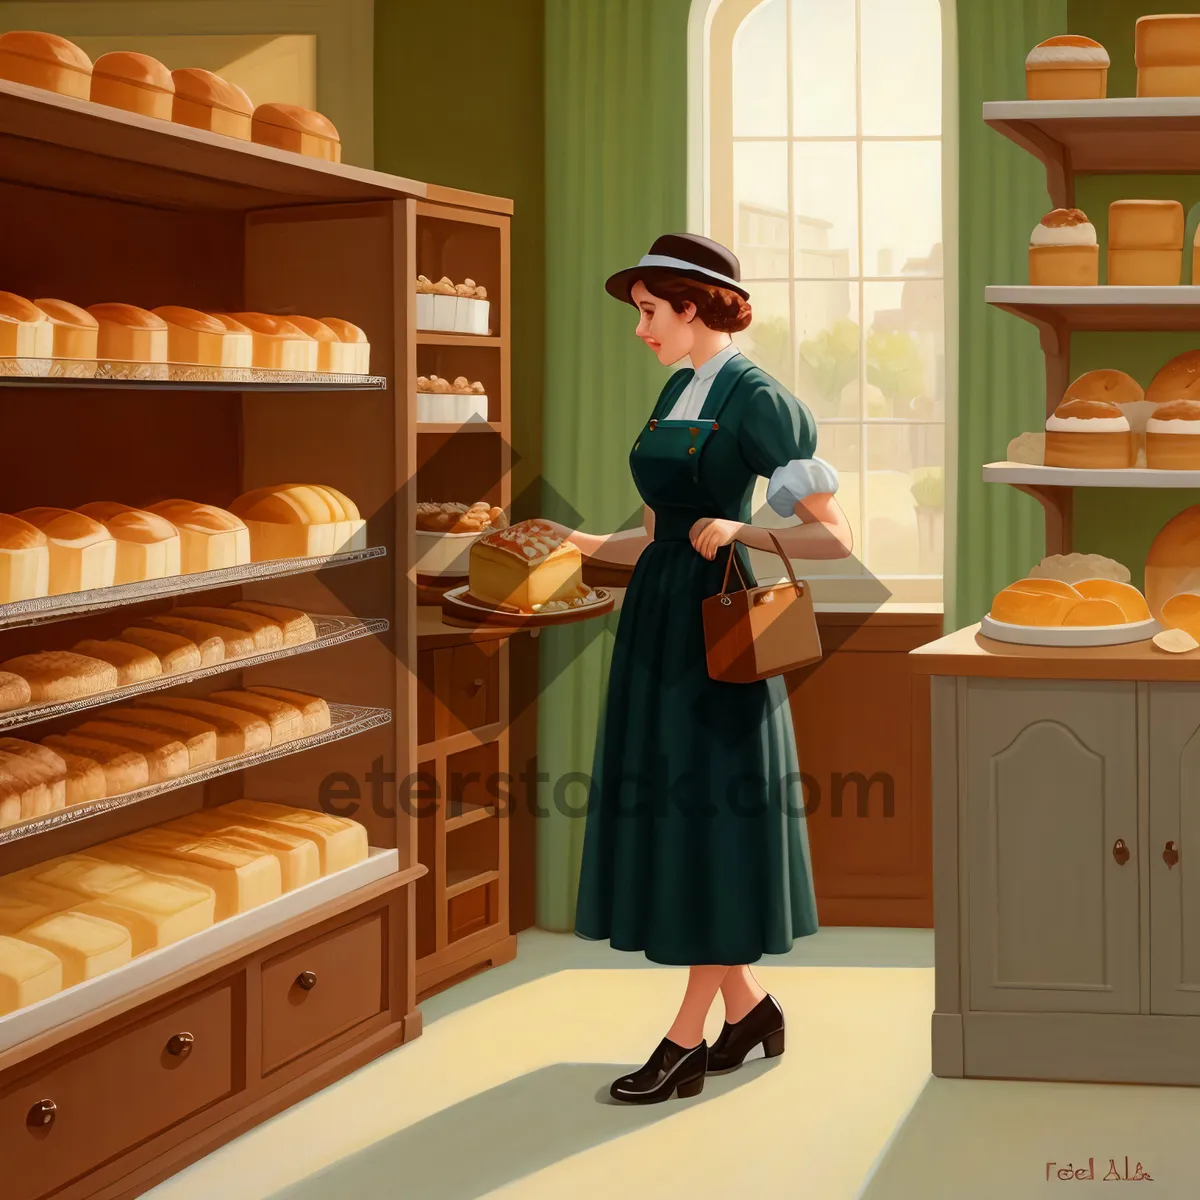 Picture of Bakery Shop Kitchen Counter - Mercantile Delights